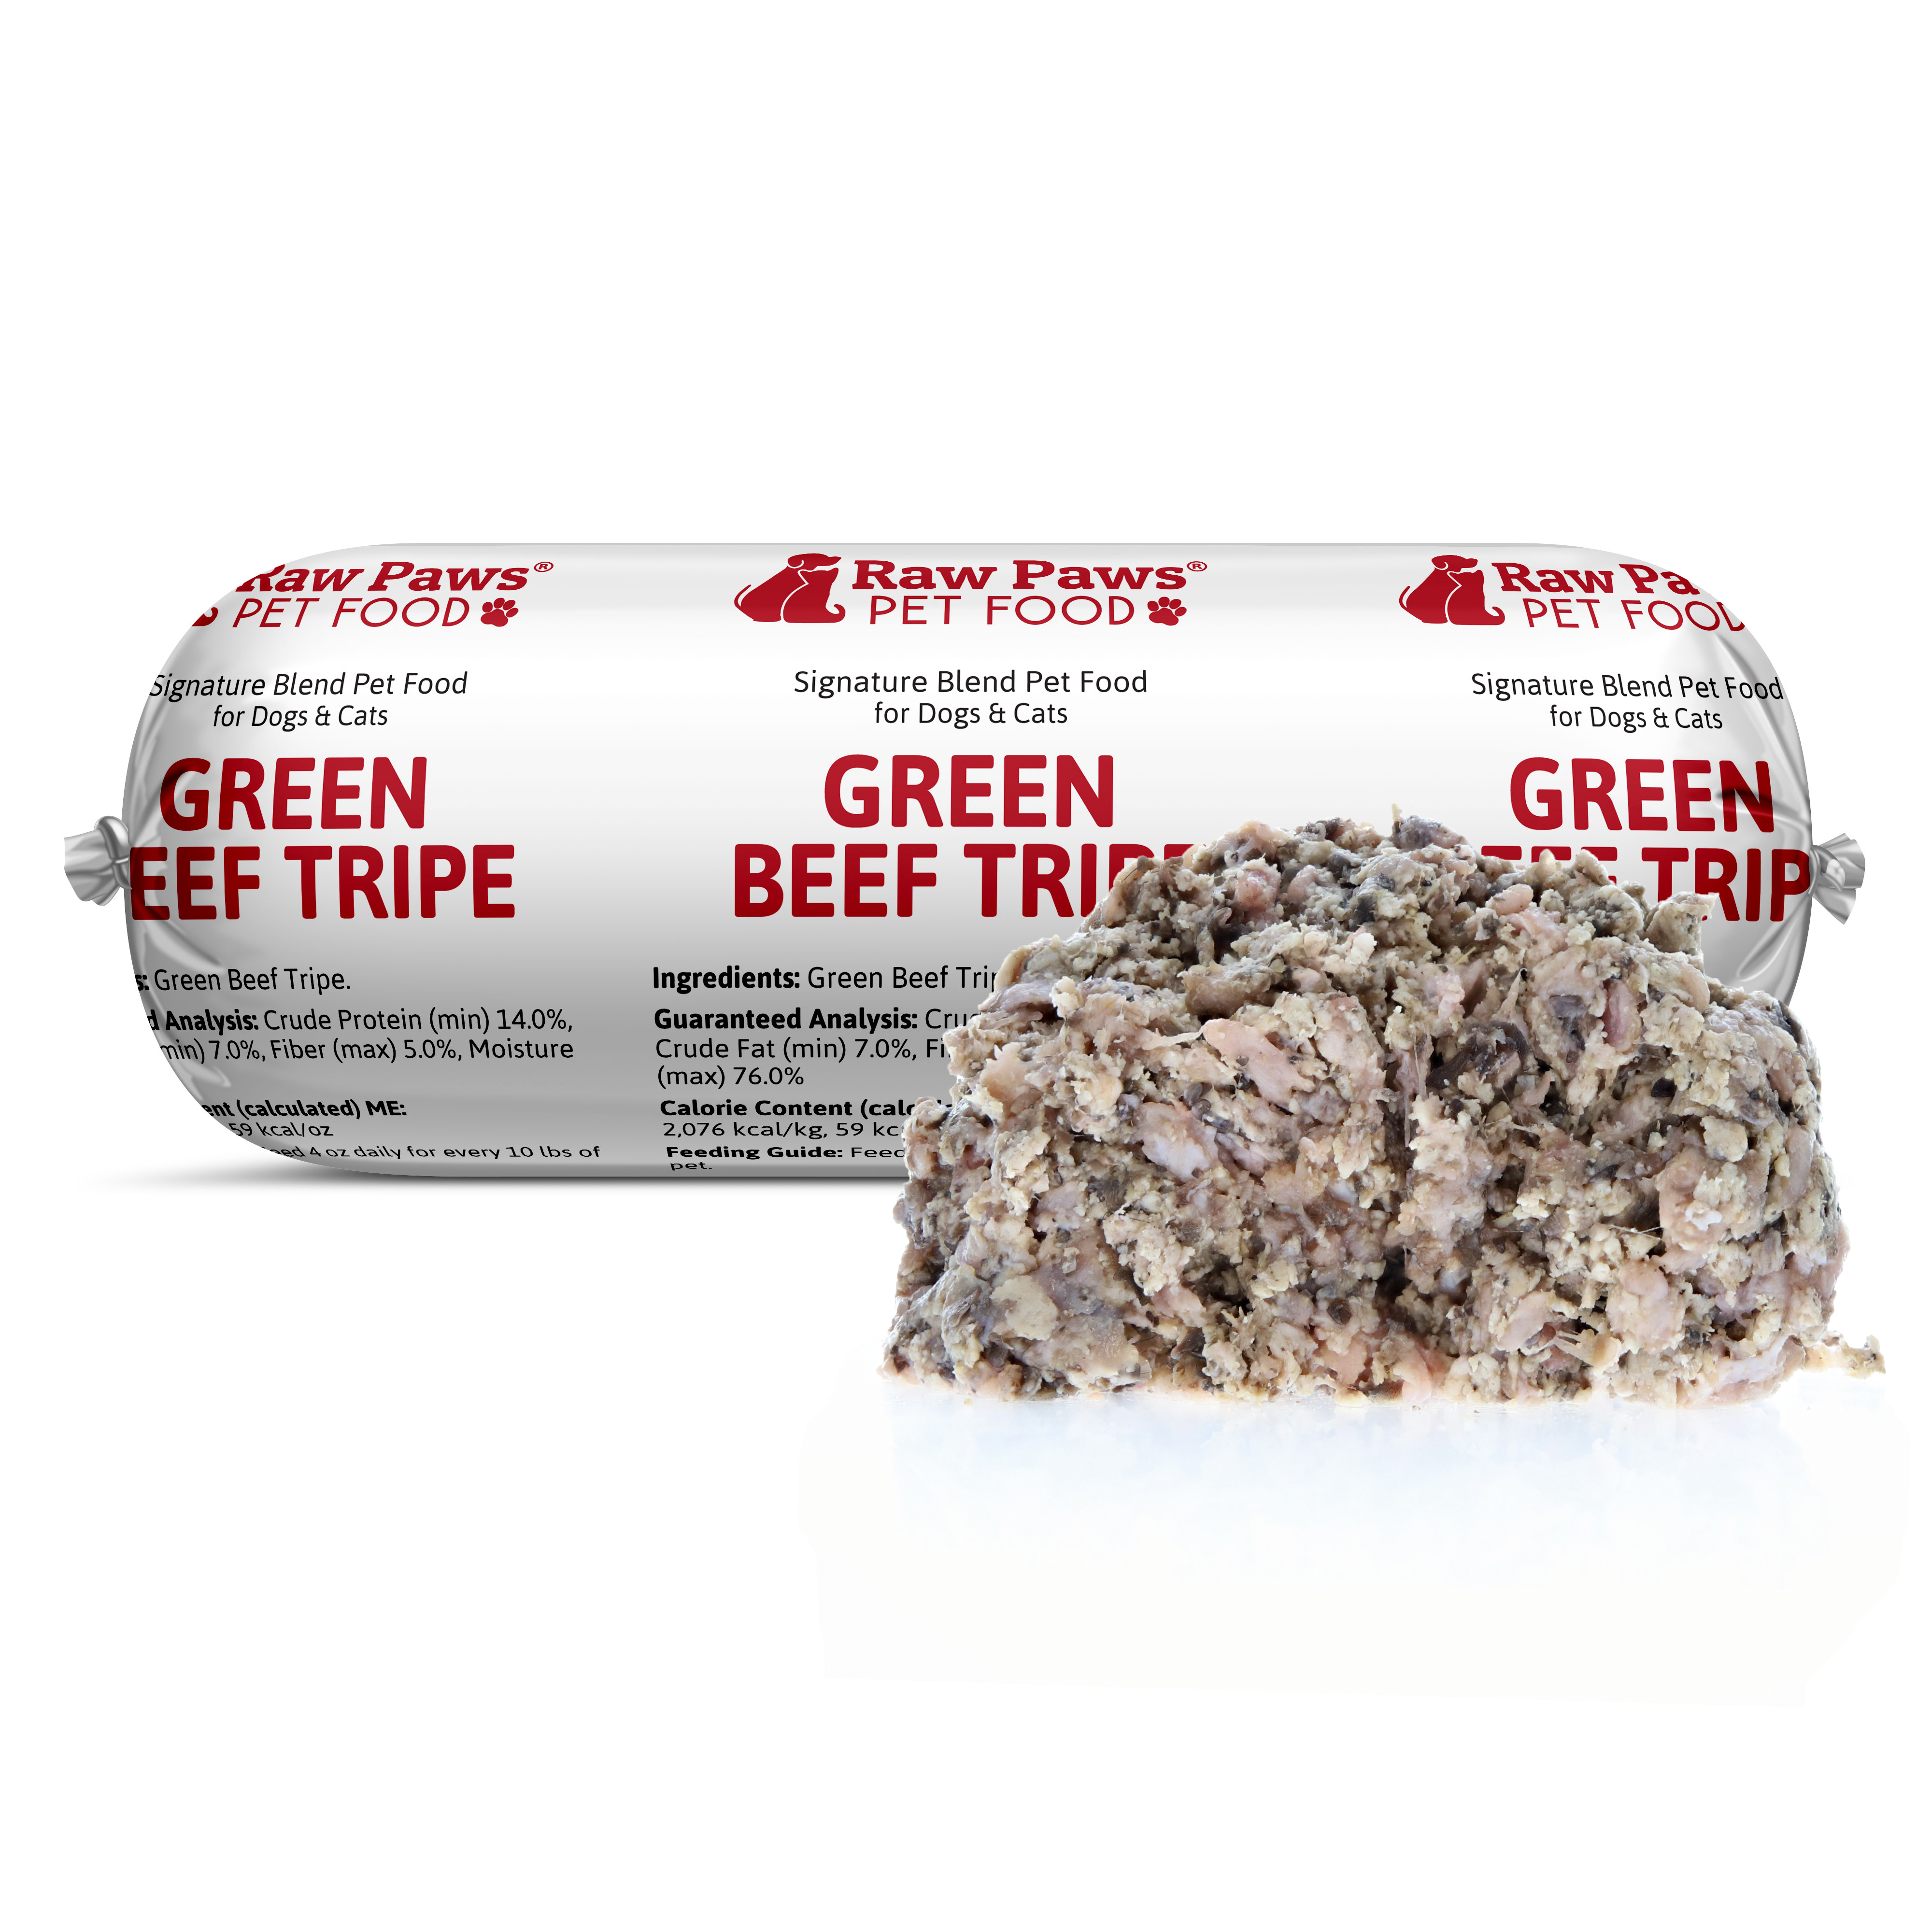 Raw Paws Signature Green Beef Tripe for Dogs & Cats, 1 lb